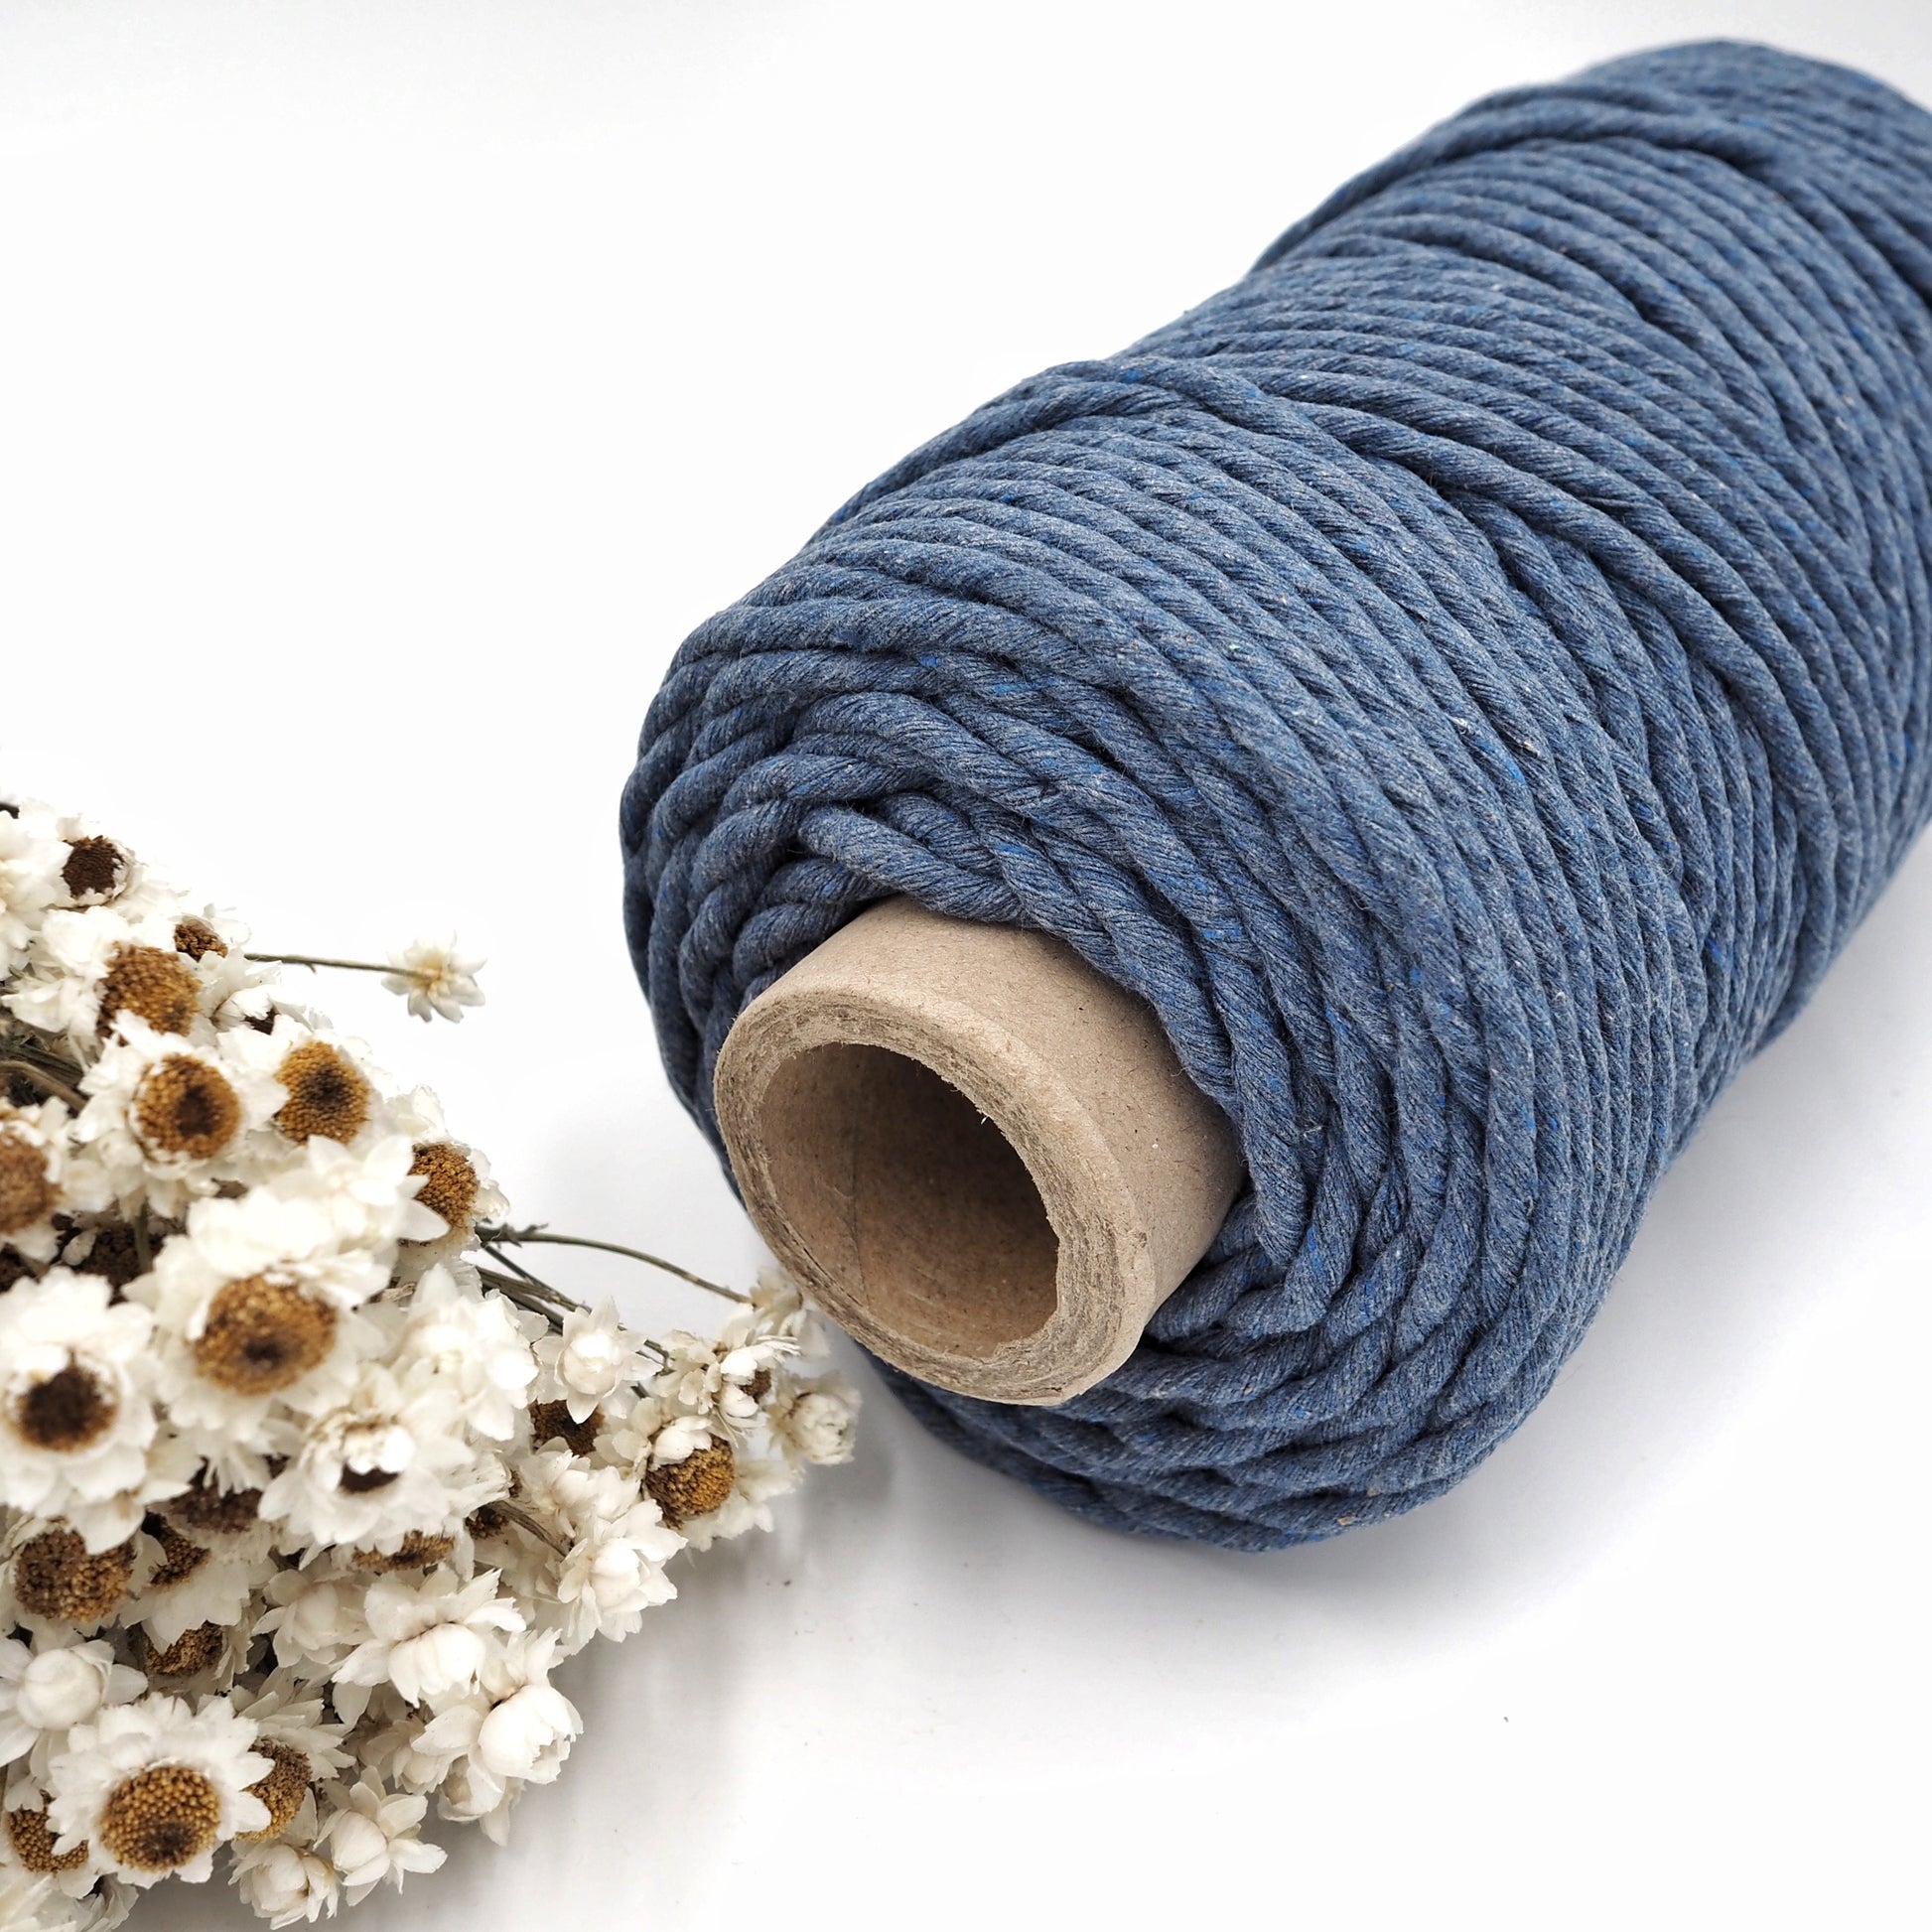 5mm recycled cotton string